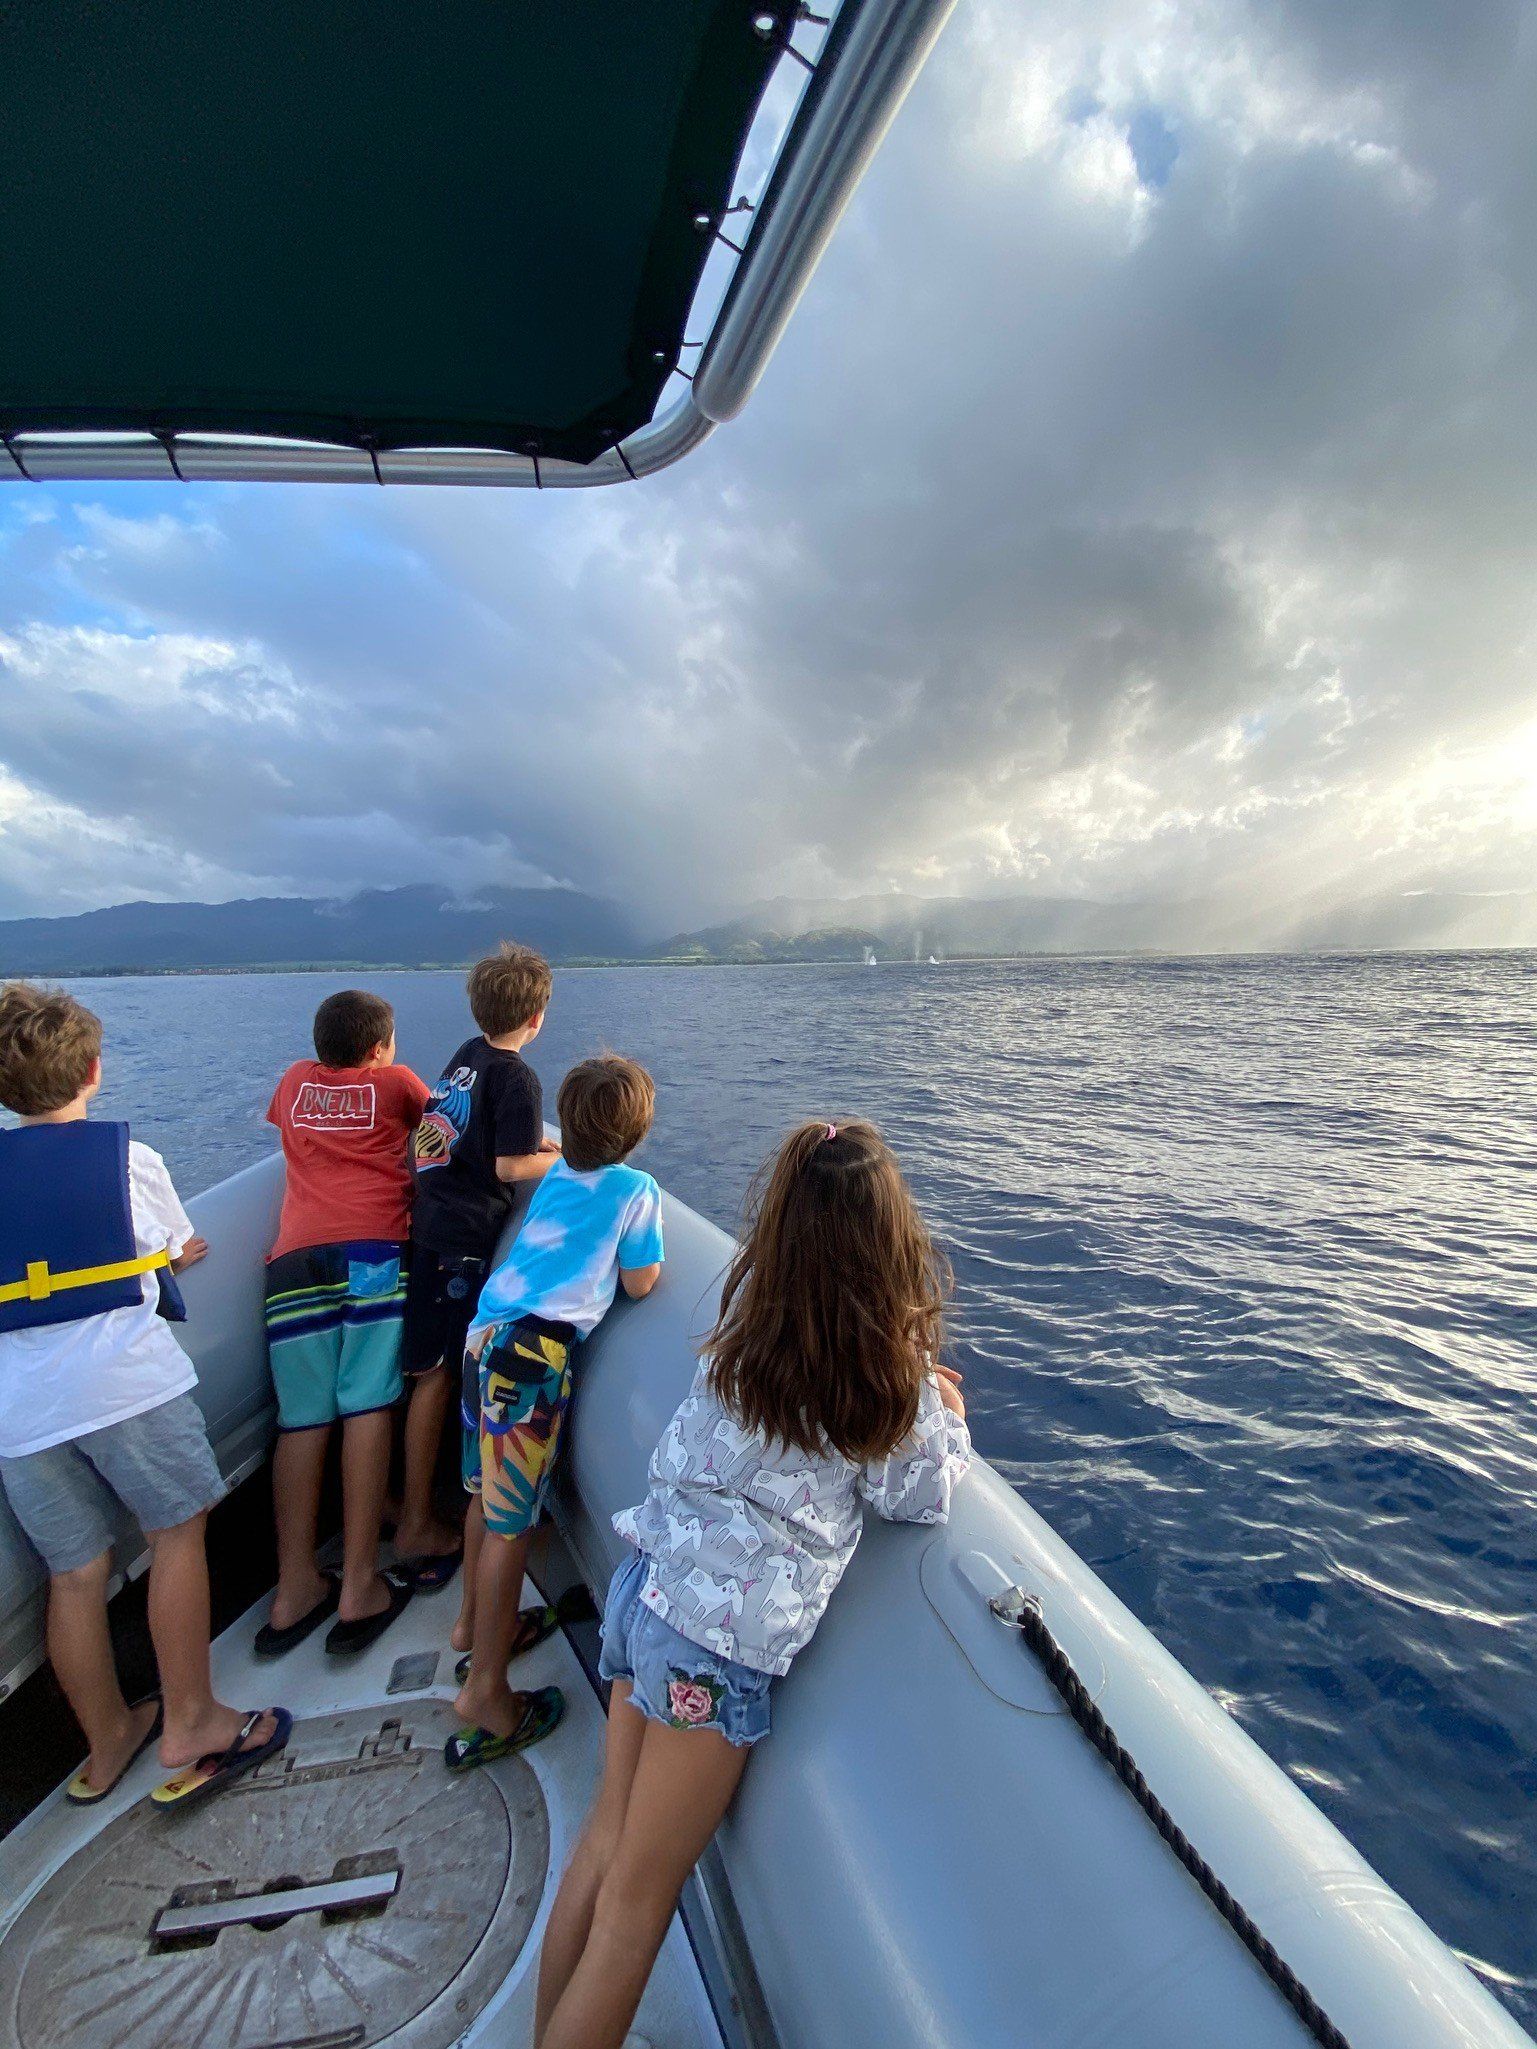 oahu boat tours, whale-watching and sightseeing of turtles, dolphins and sharks on the North Shore.